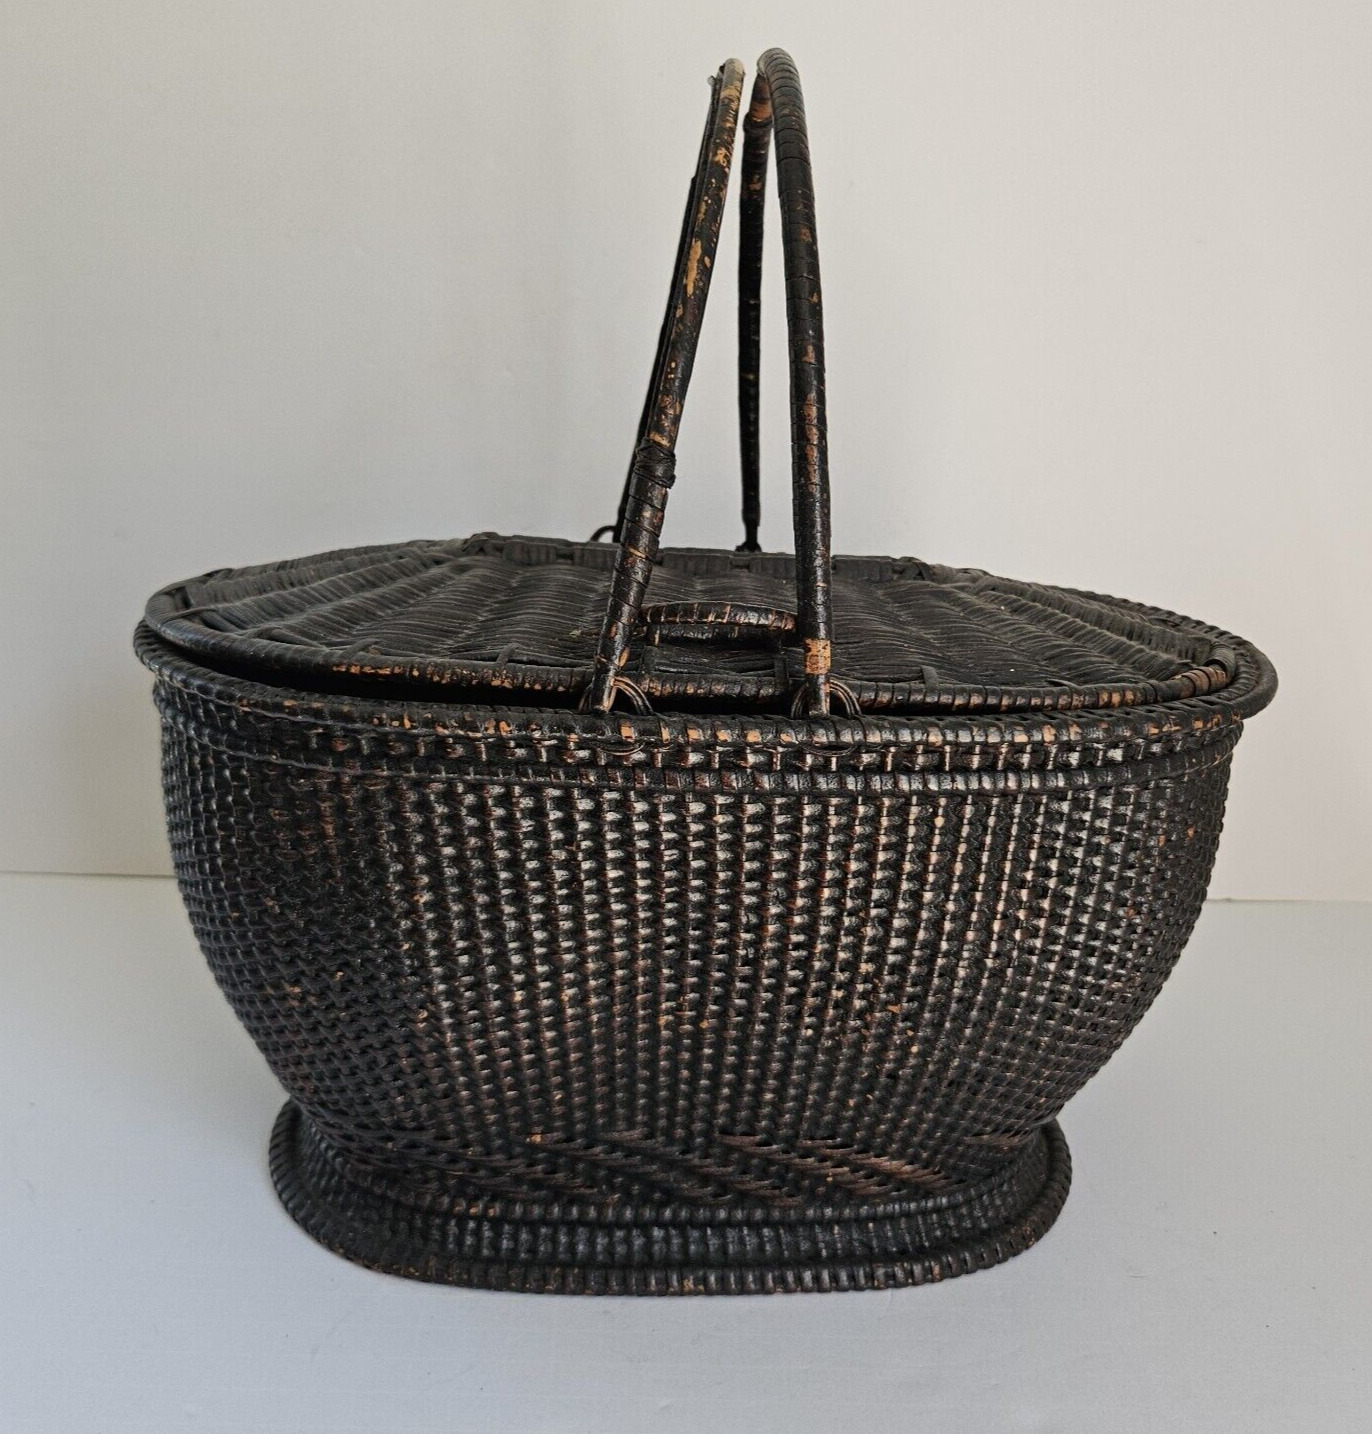 Antique Wicker Basket with Handles and Lid 13.5